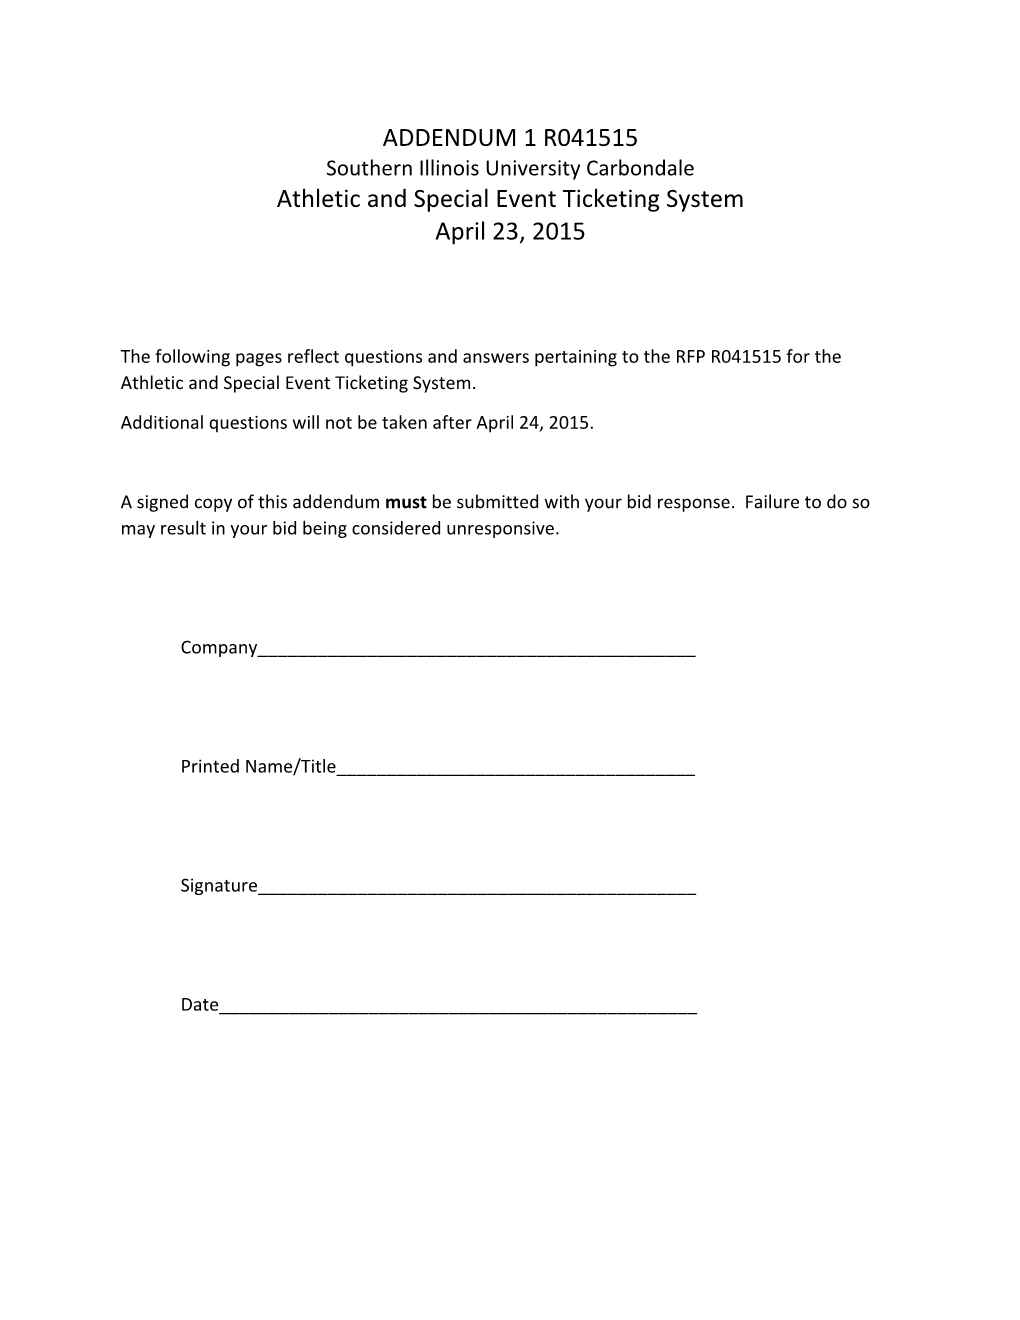 ADDENDUM 1 R041515 Athletic and Special Event Ticketing System